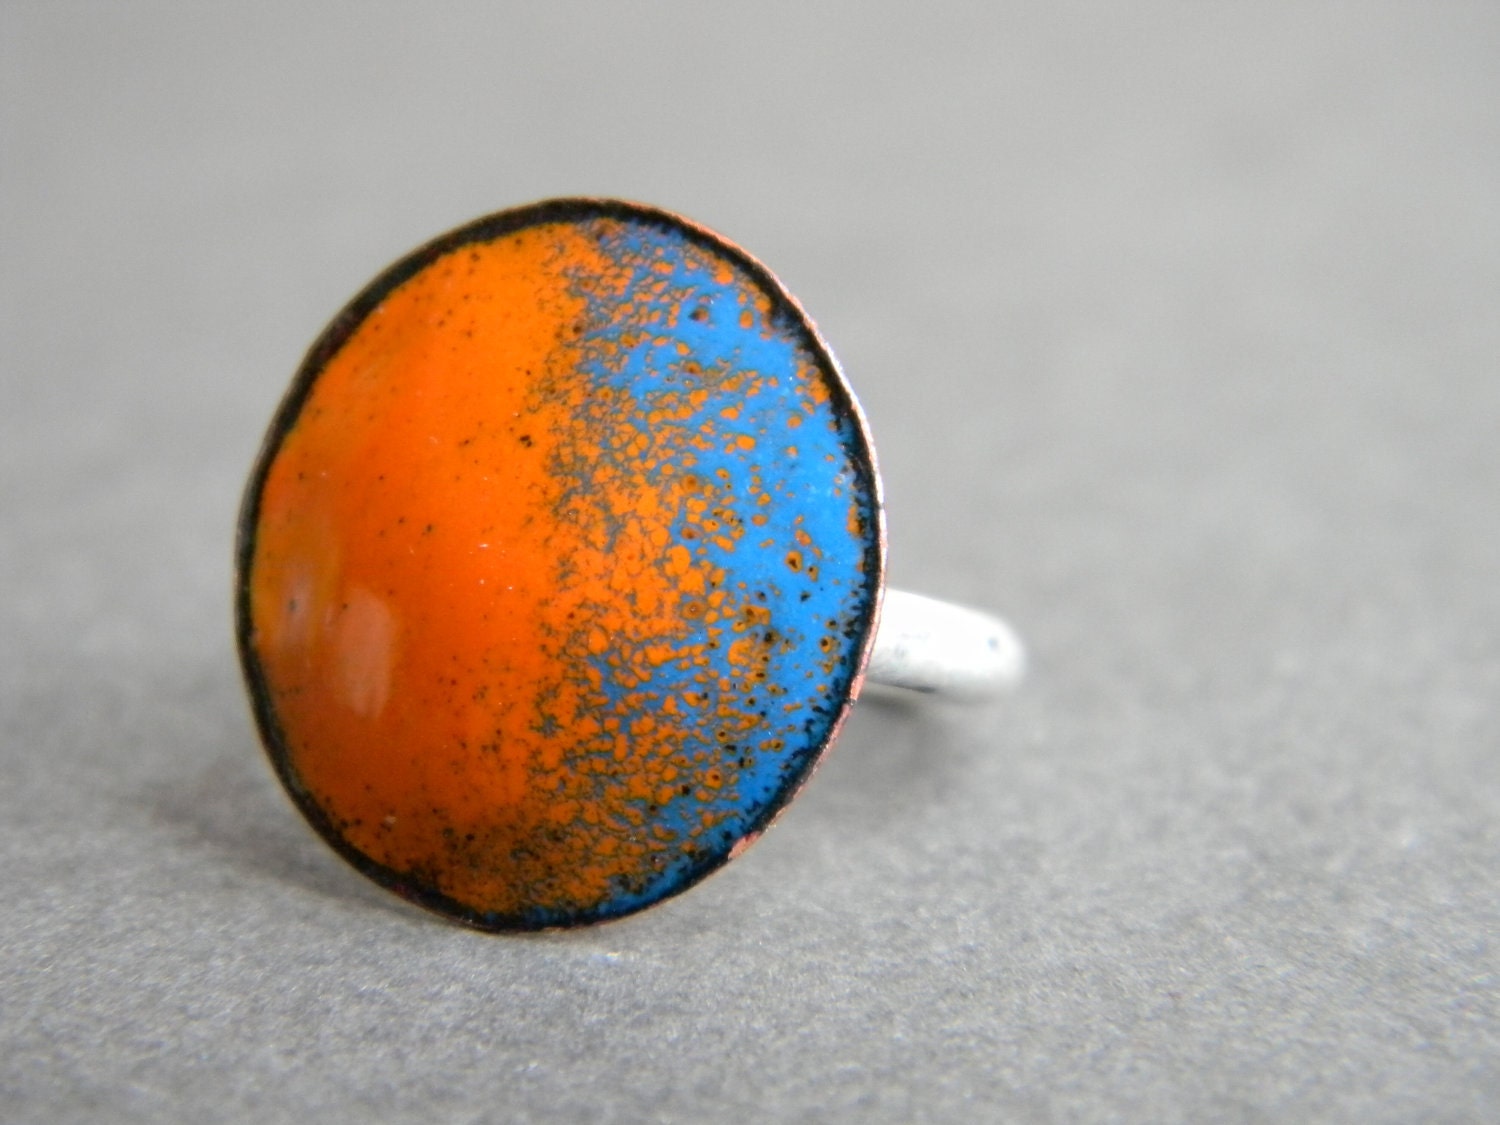 Bright Lights enamel cocktail ring orange and blue - katerieppeljewelry